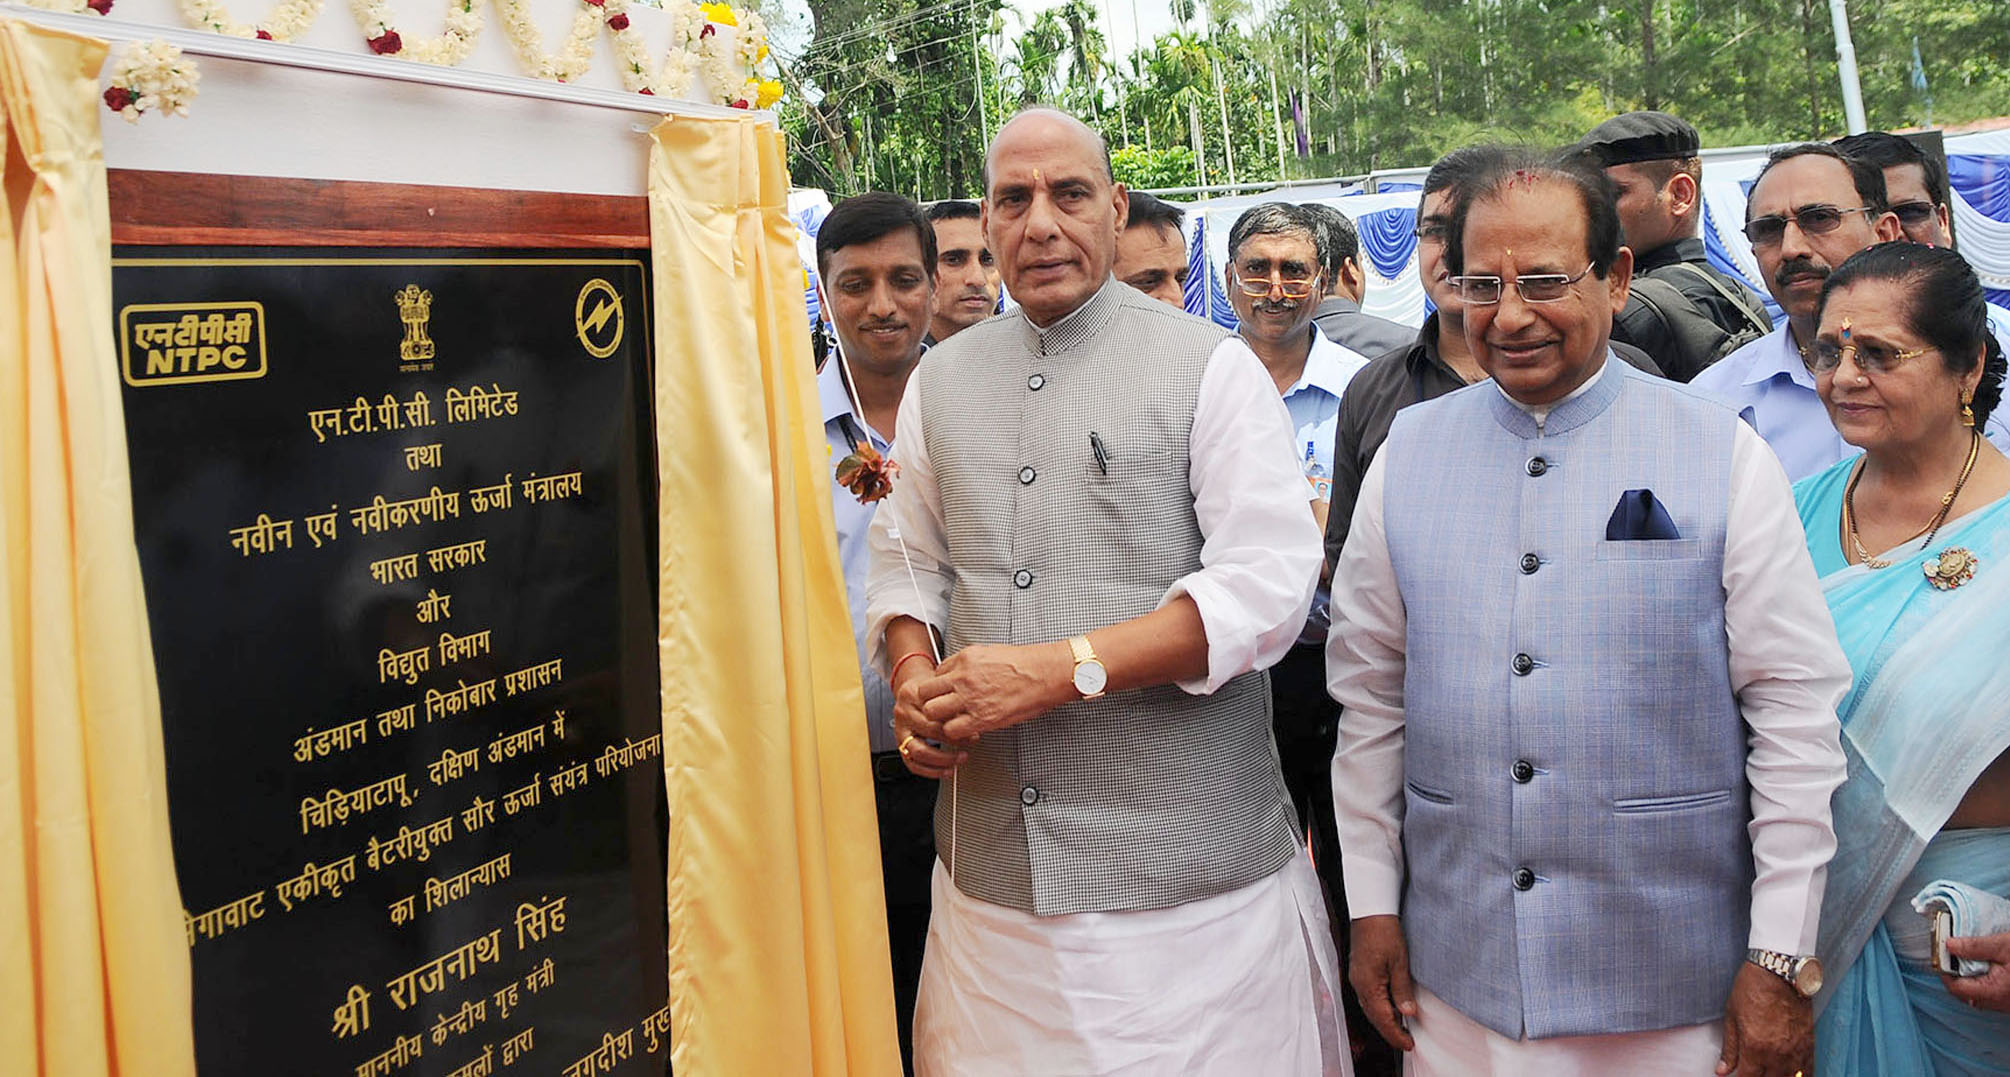 The Union Home Minister Shri Rajnath Singh laying the foundation stone for solar power plant, at Chidiyatapu, in South Andaman on April 07, 2017. 	The Lieutenant Governor of Andaman and Nicobar Islands, Prof. Jagdish Mukhi is also seen.